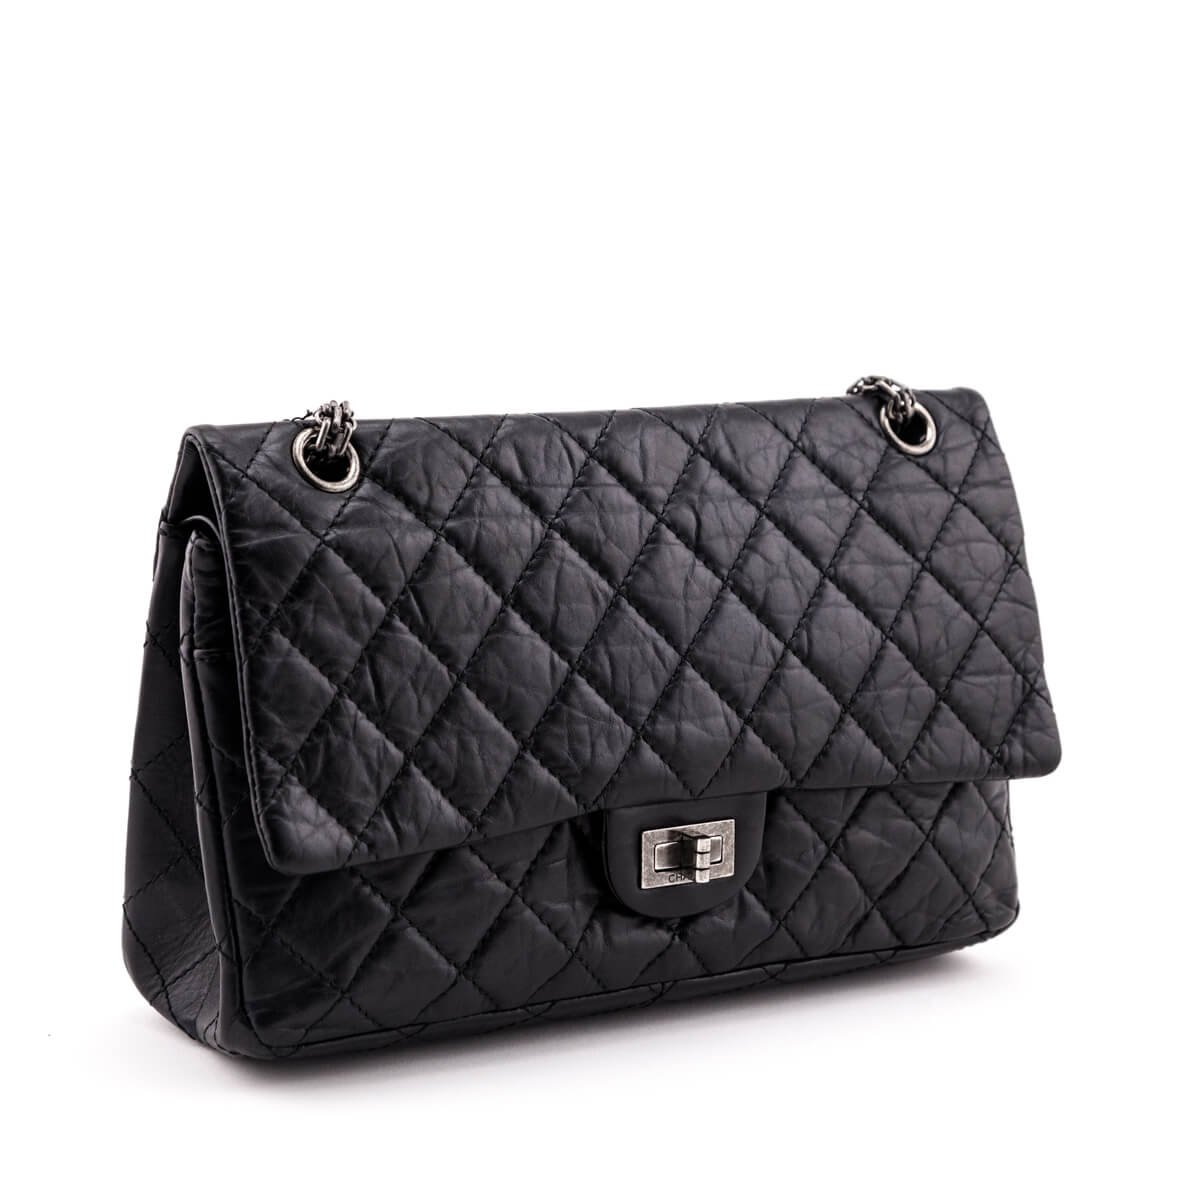 Chanel Navy Blue 2.55 Reissue Quilted Calfskin Leather 226 Flap Bag